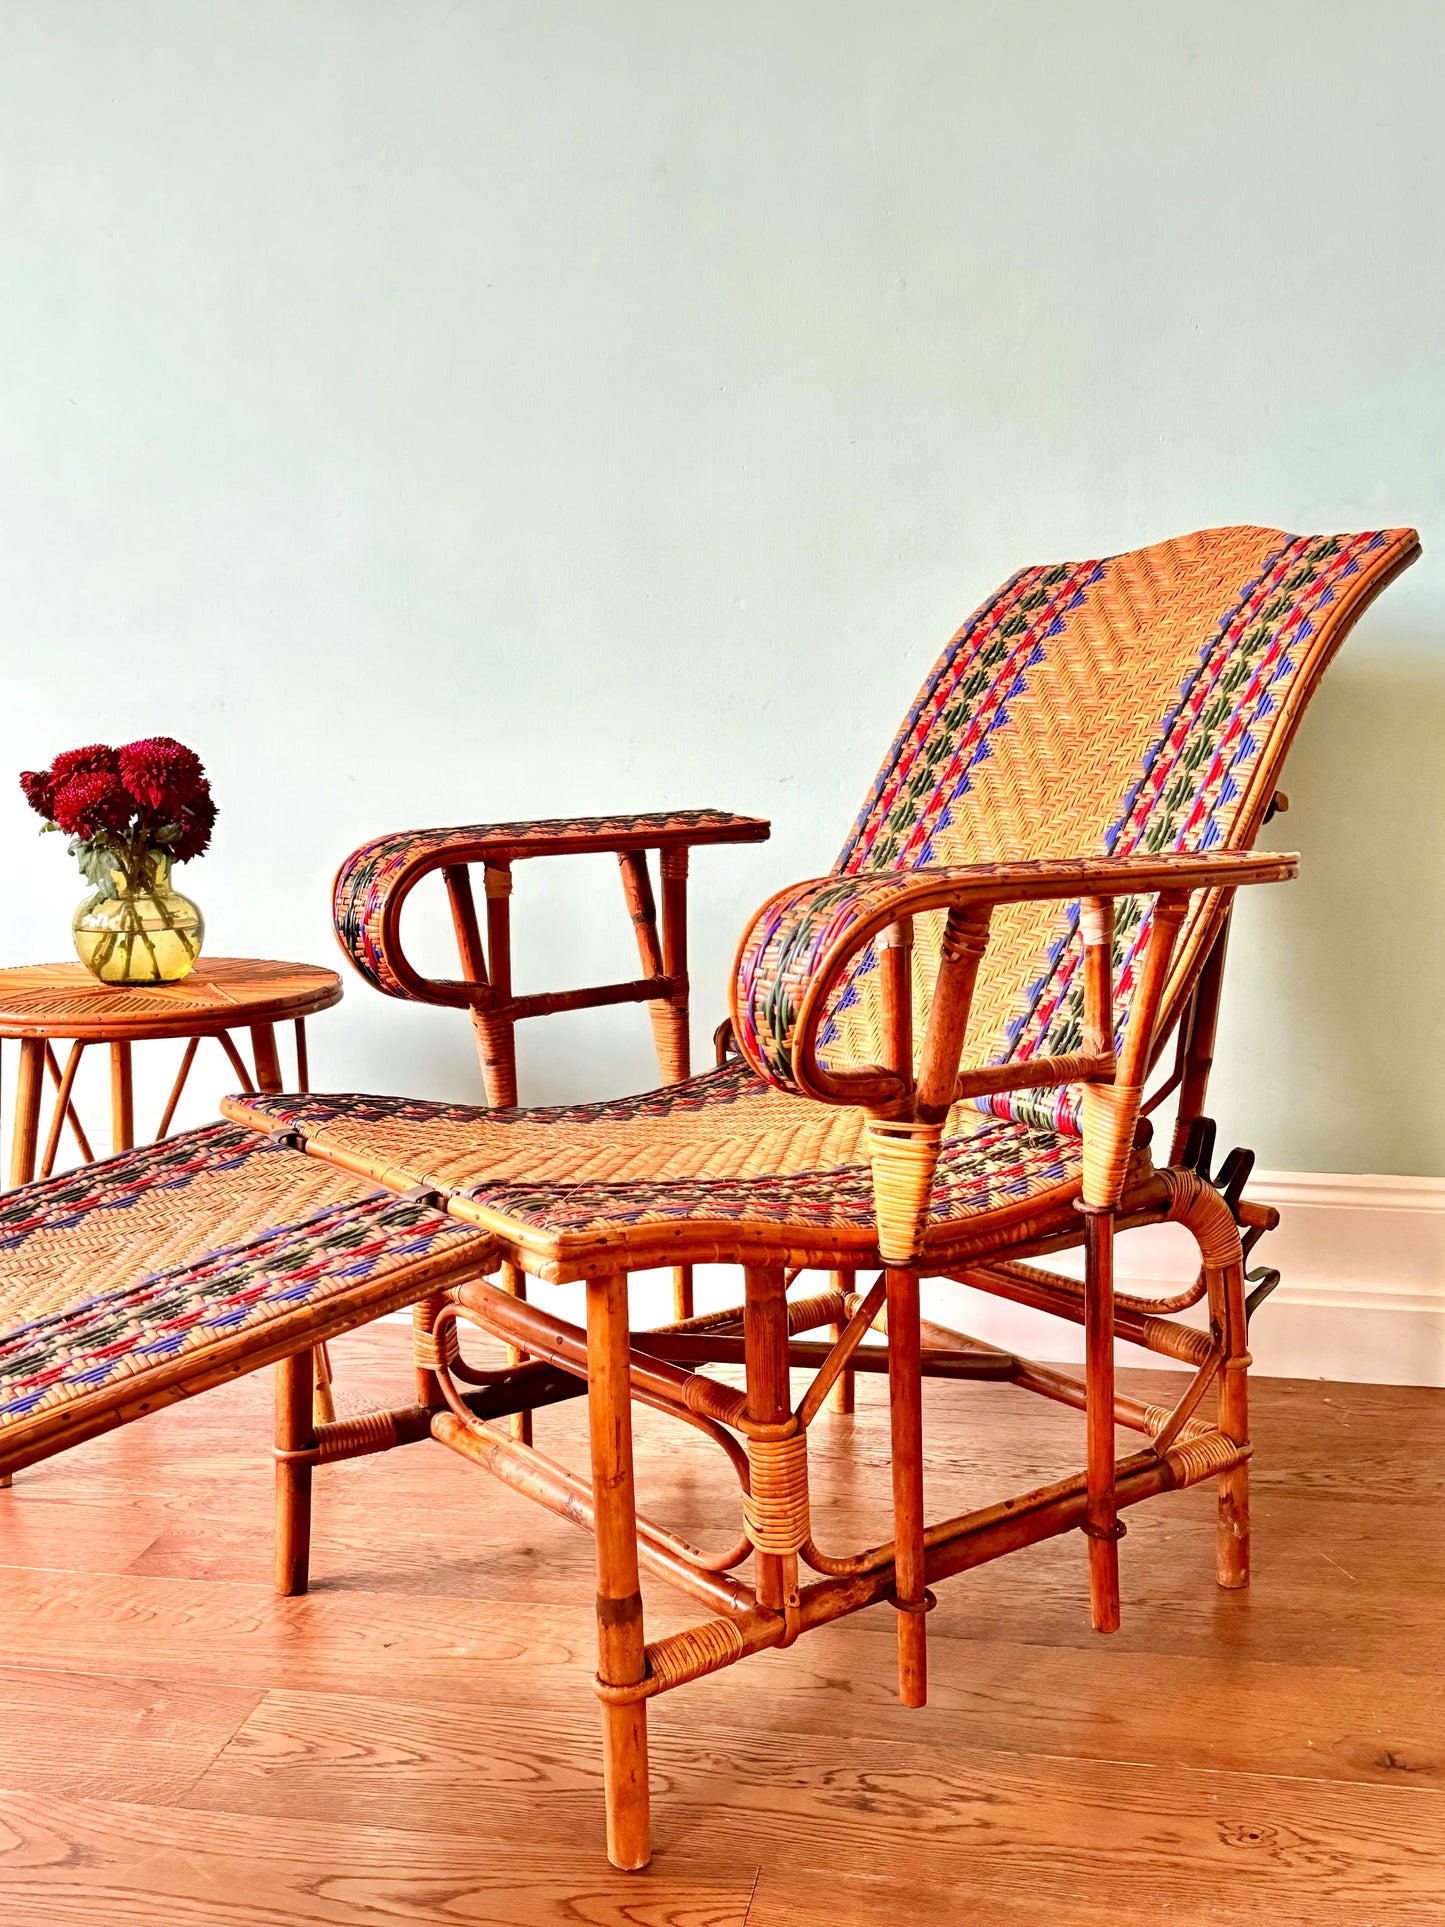 Early C20th French Bamboo & Rattan Chaise Longue